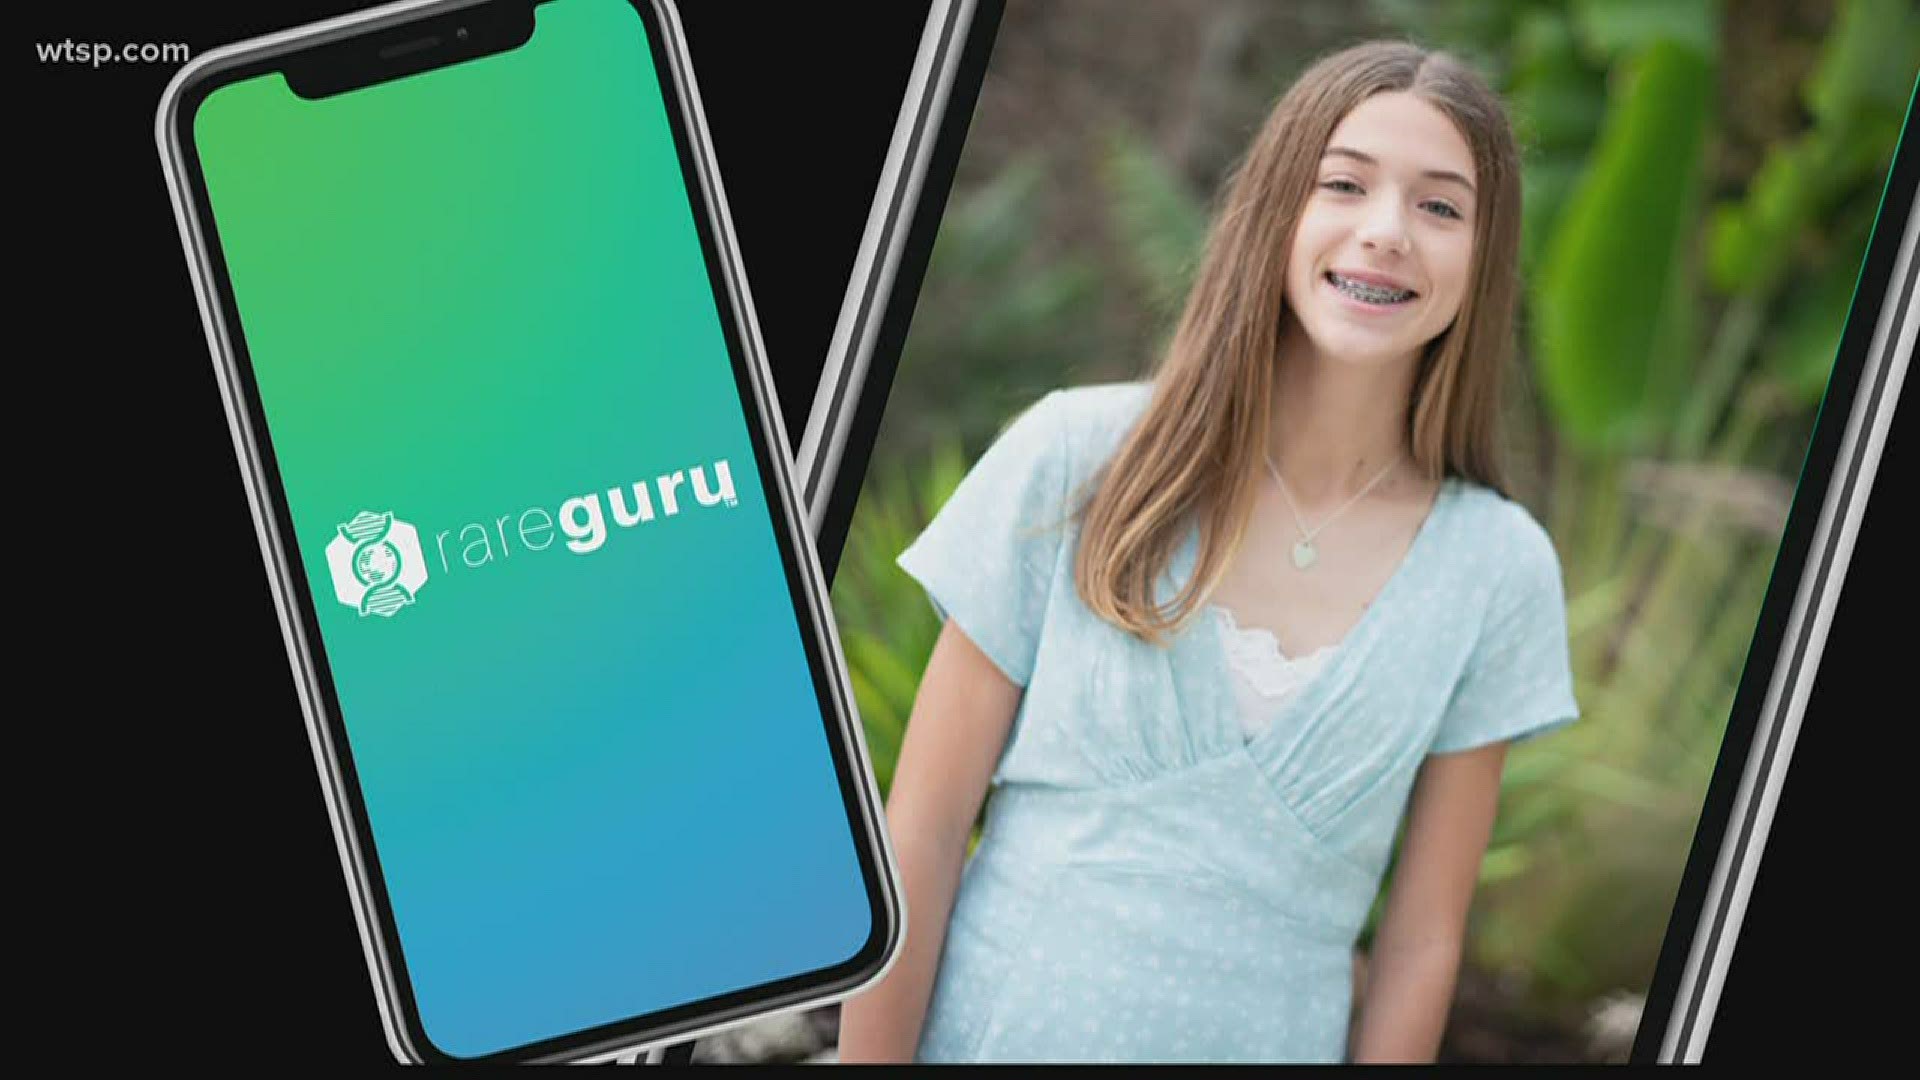 The RareGuru app connects people around the world suffering from rare diseases.